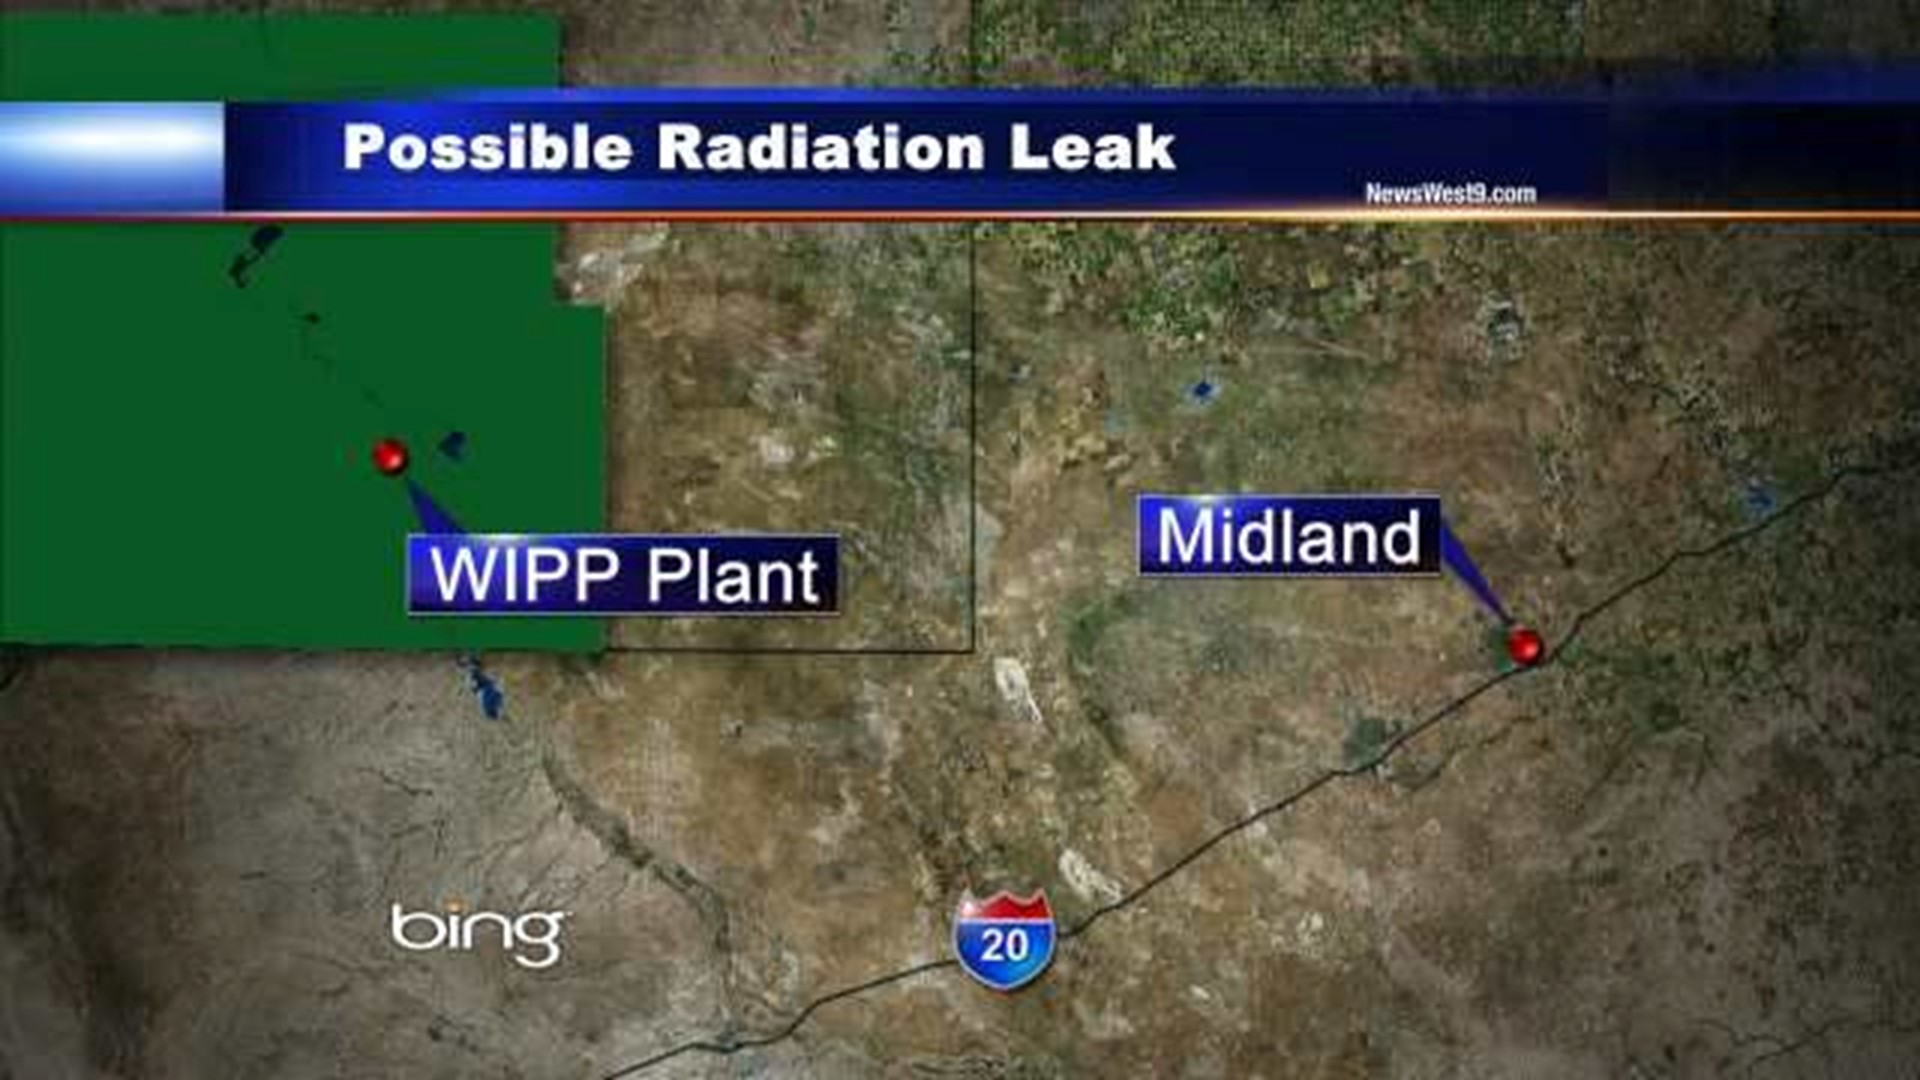 Officials Investigating "Possible Radiation Event" at WIPP Plant in New